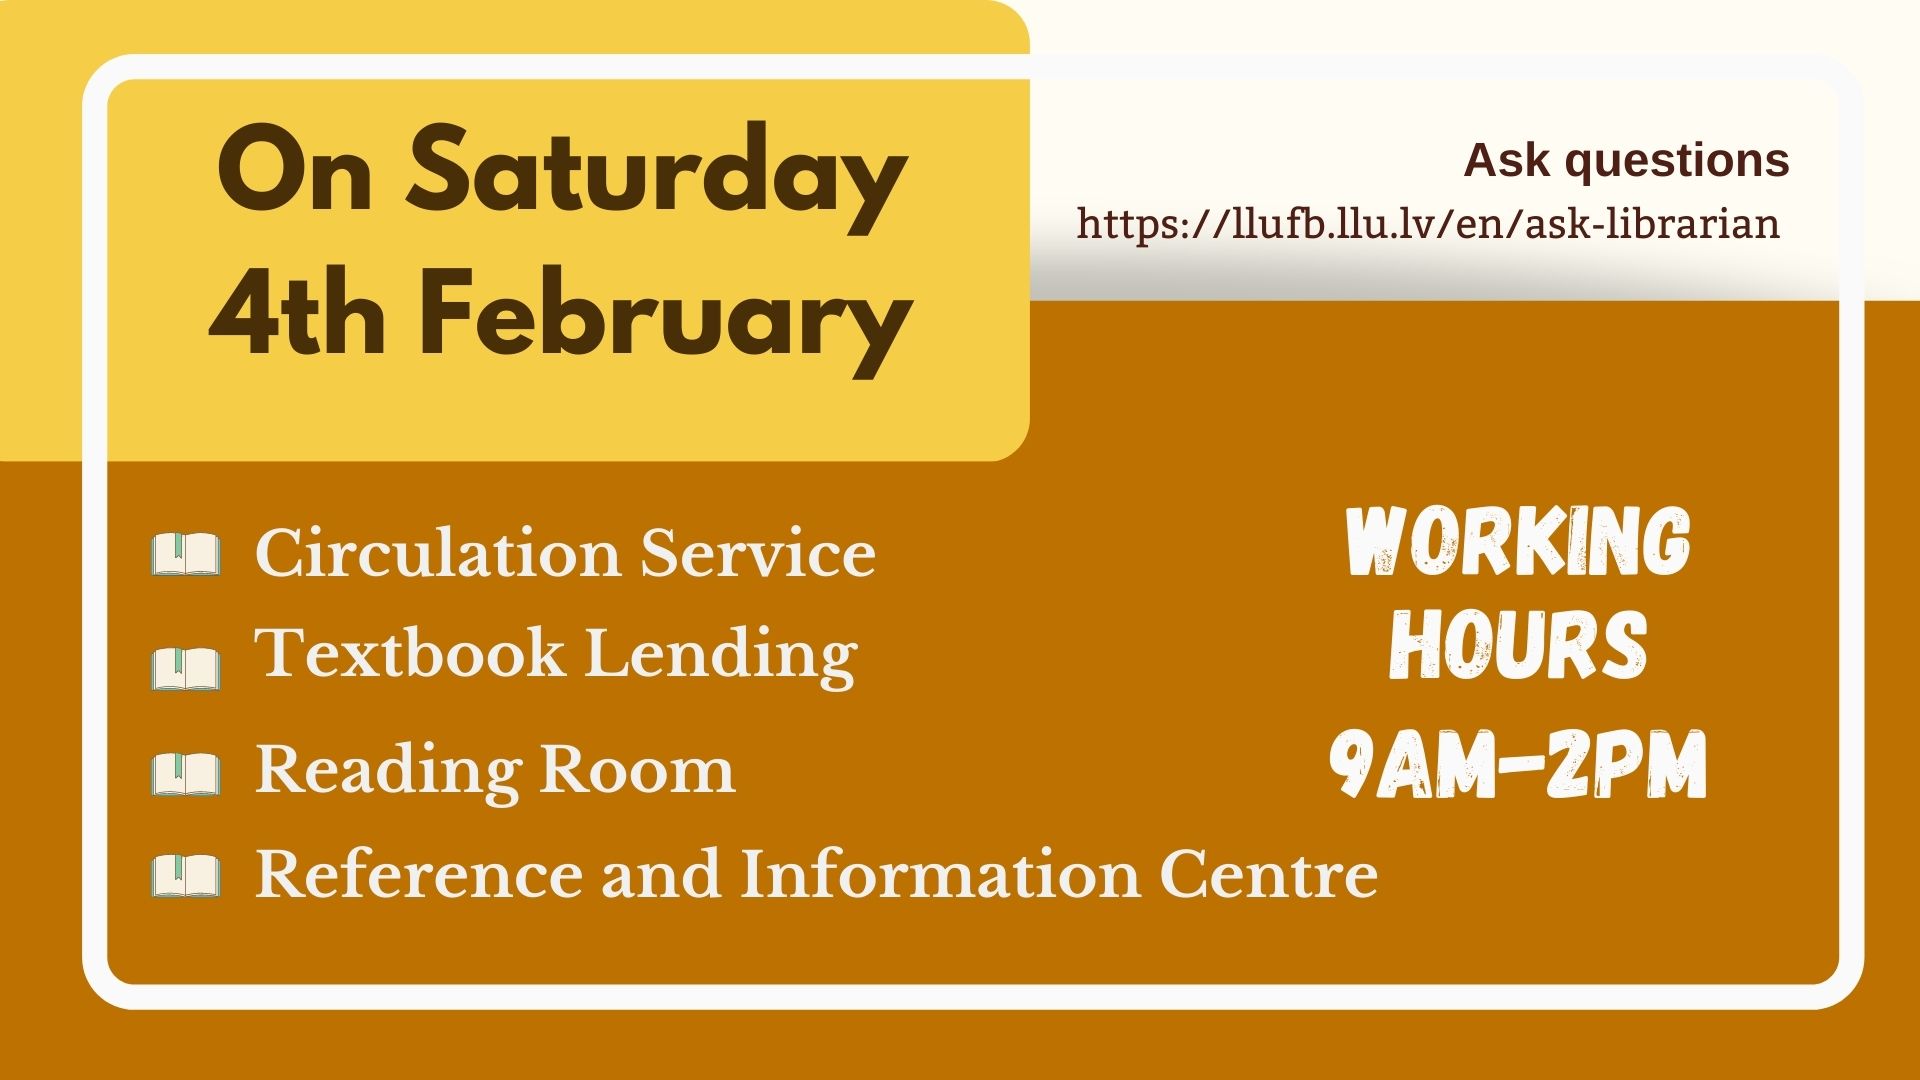 Library on Saturday 4 February working hours 9am-2pm